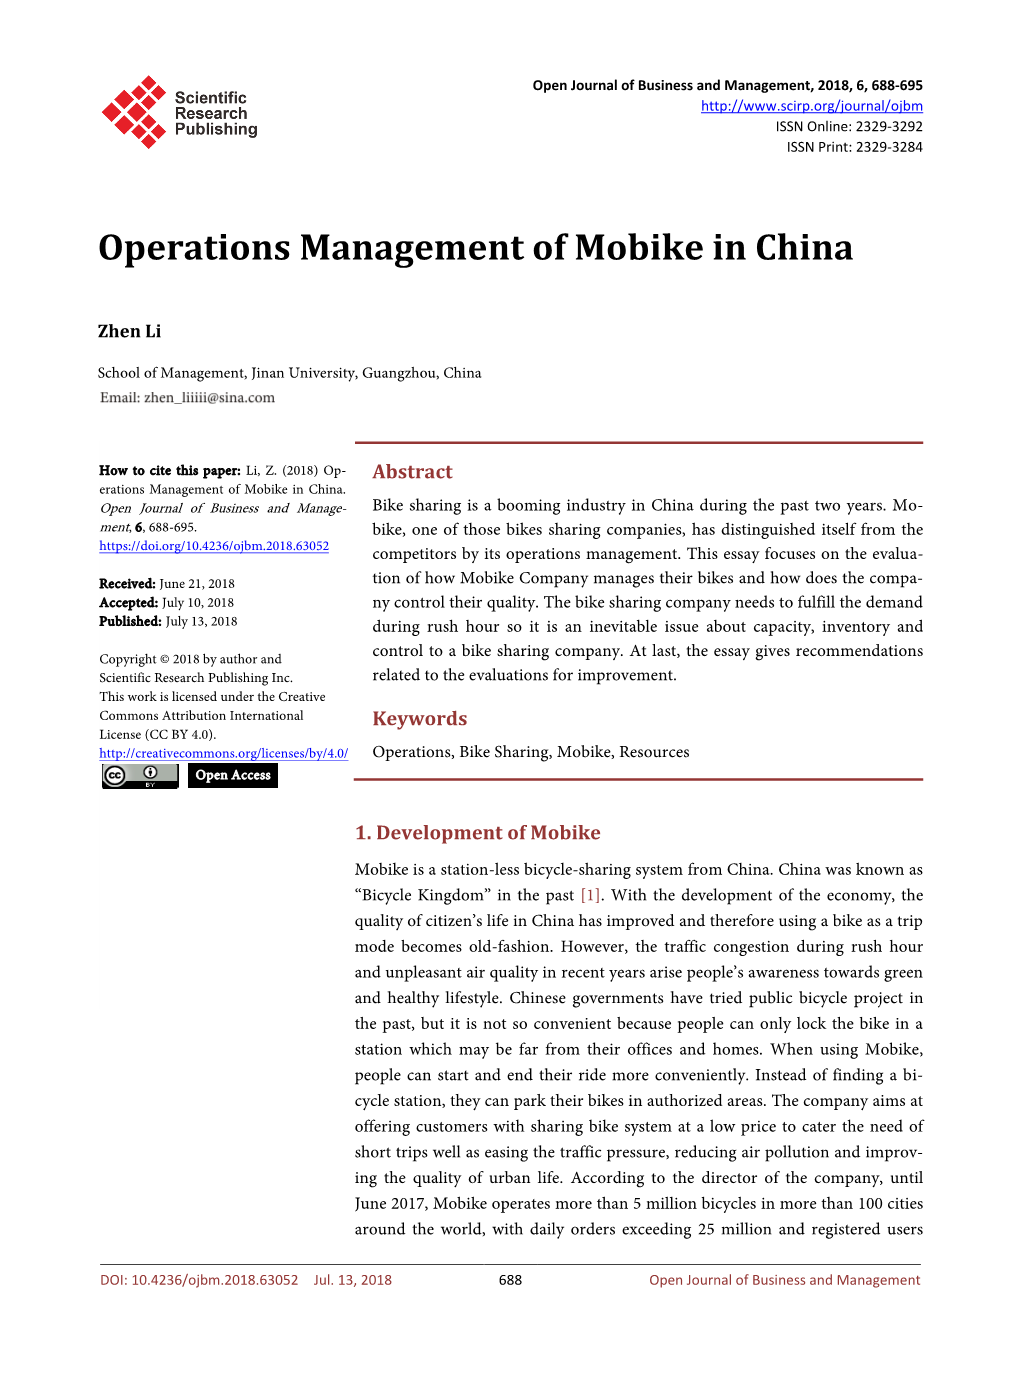 Operations Management of Mobike in China